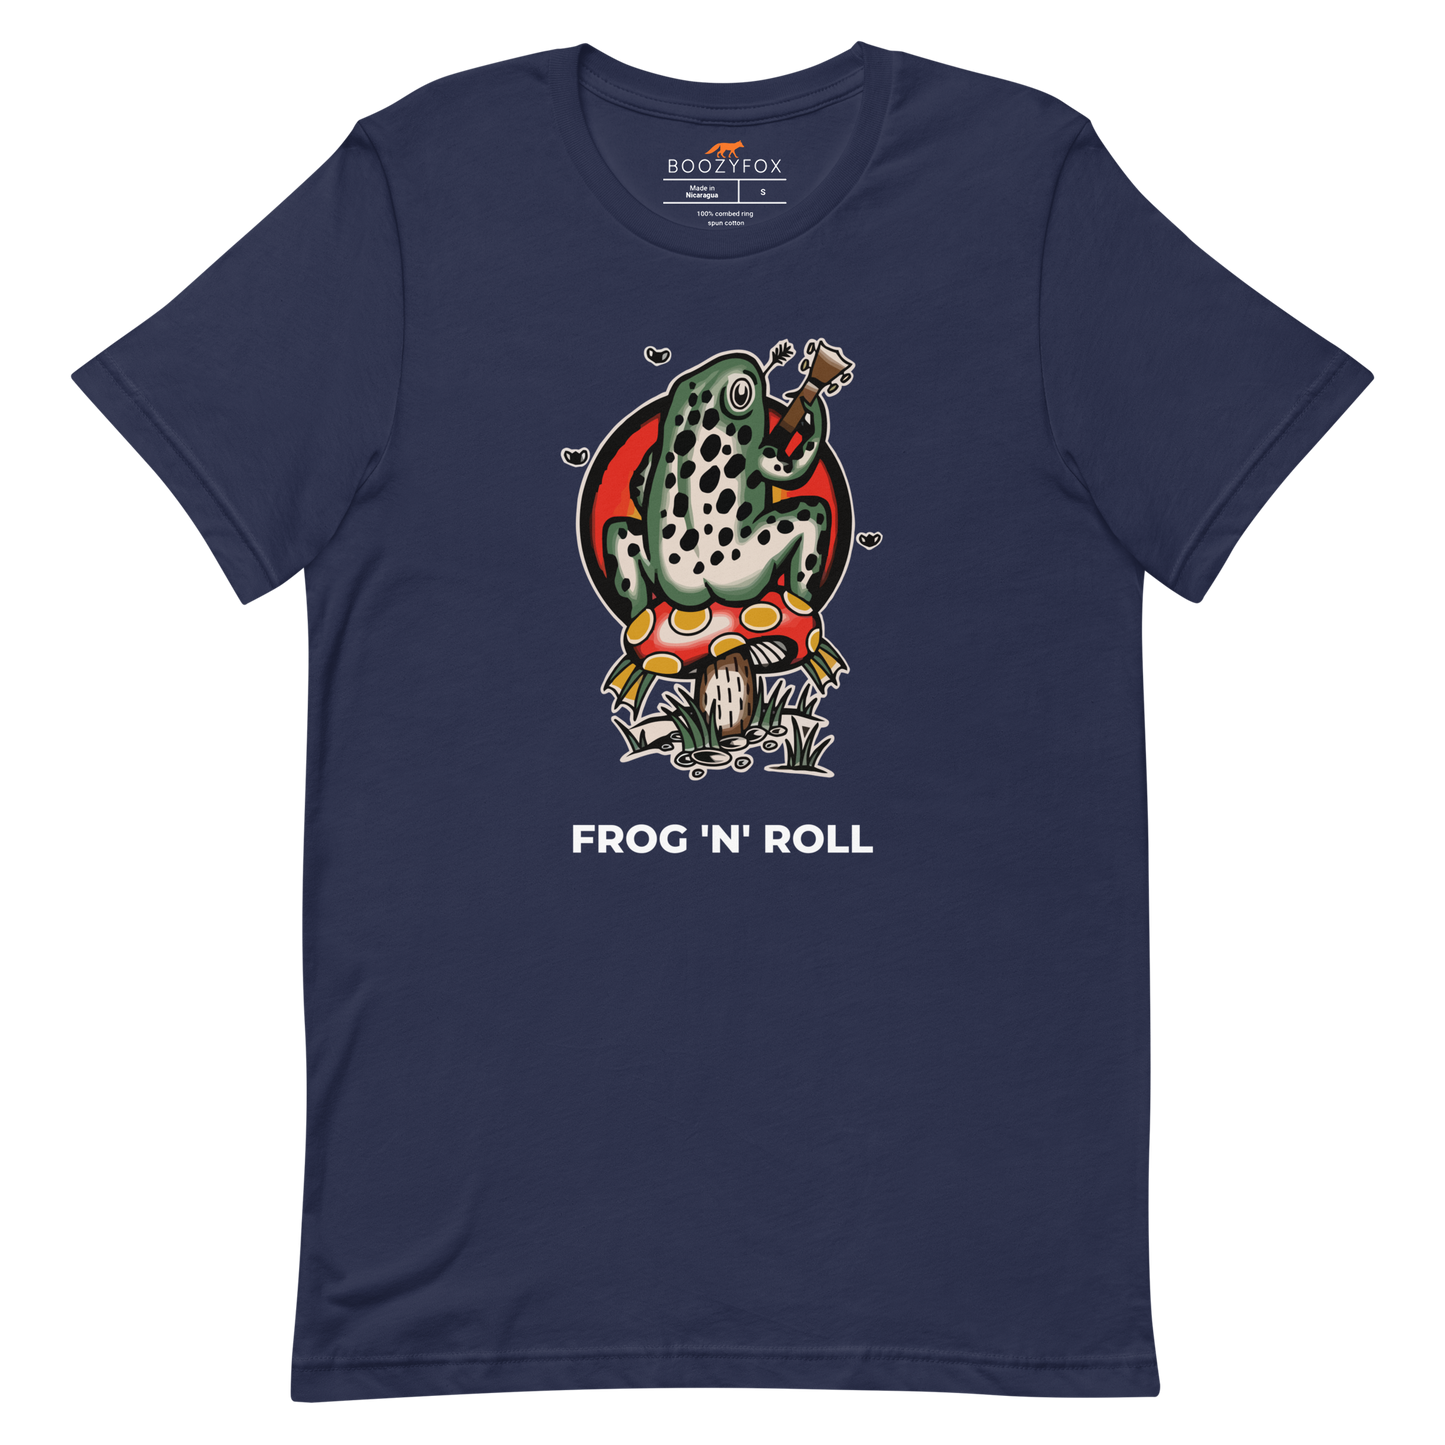 Navy Premium Frog Tee featuring a funny Frog 'n' Roll graphic on the chest - Funny Graphic Frog Tees - Boozy Fox